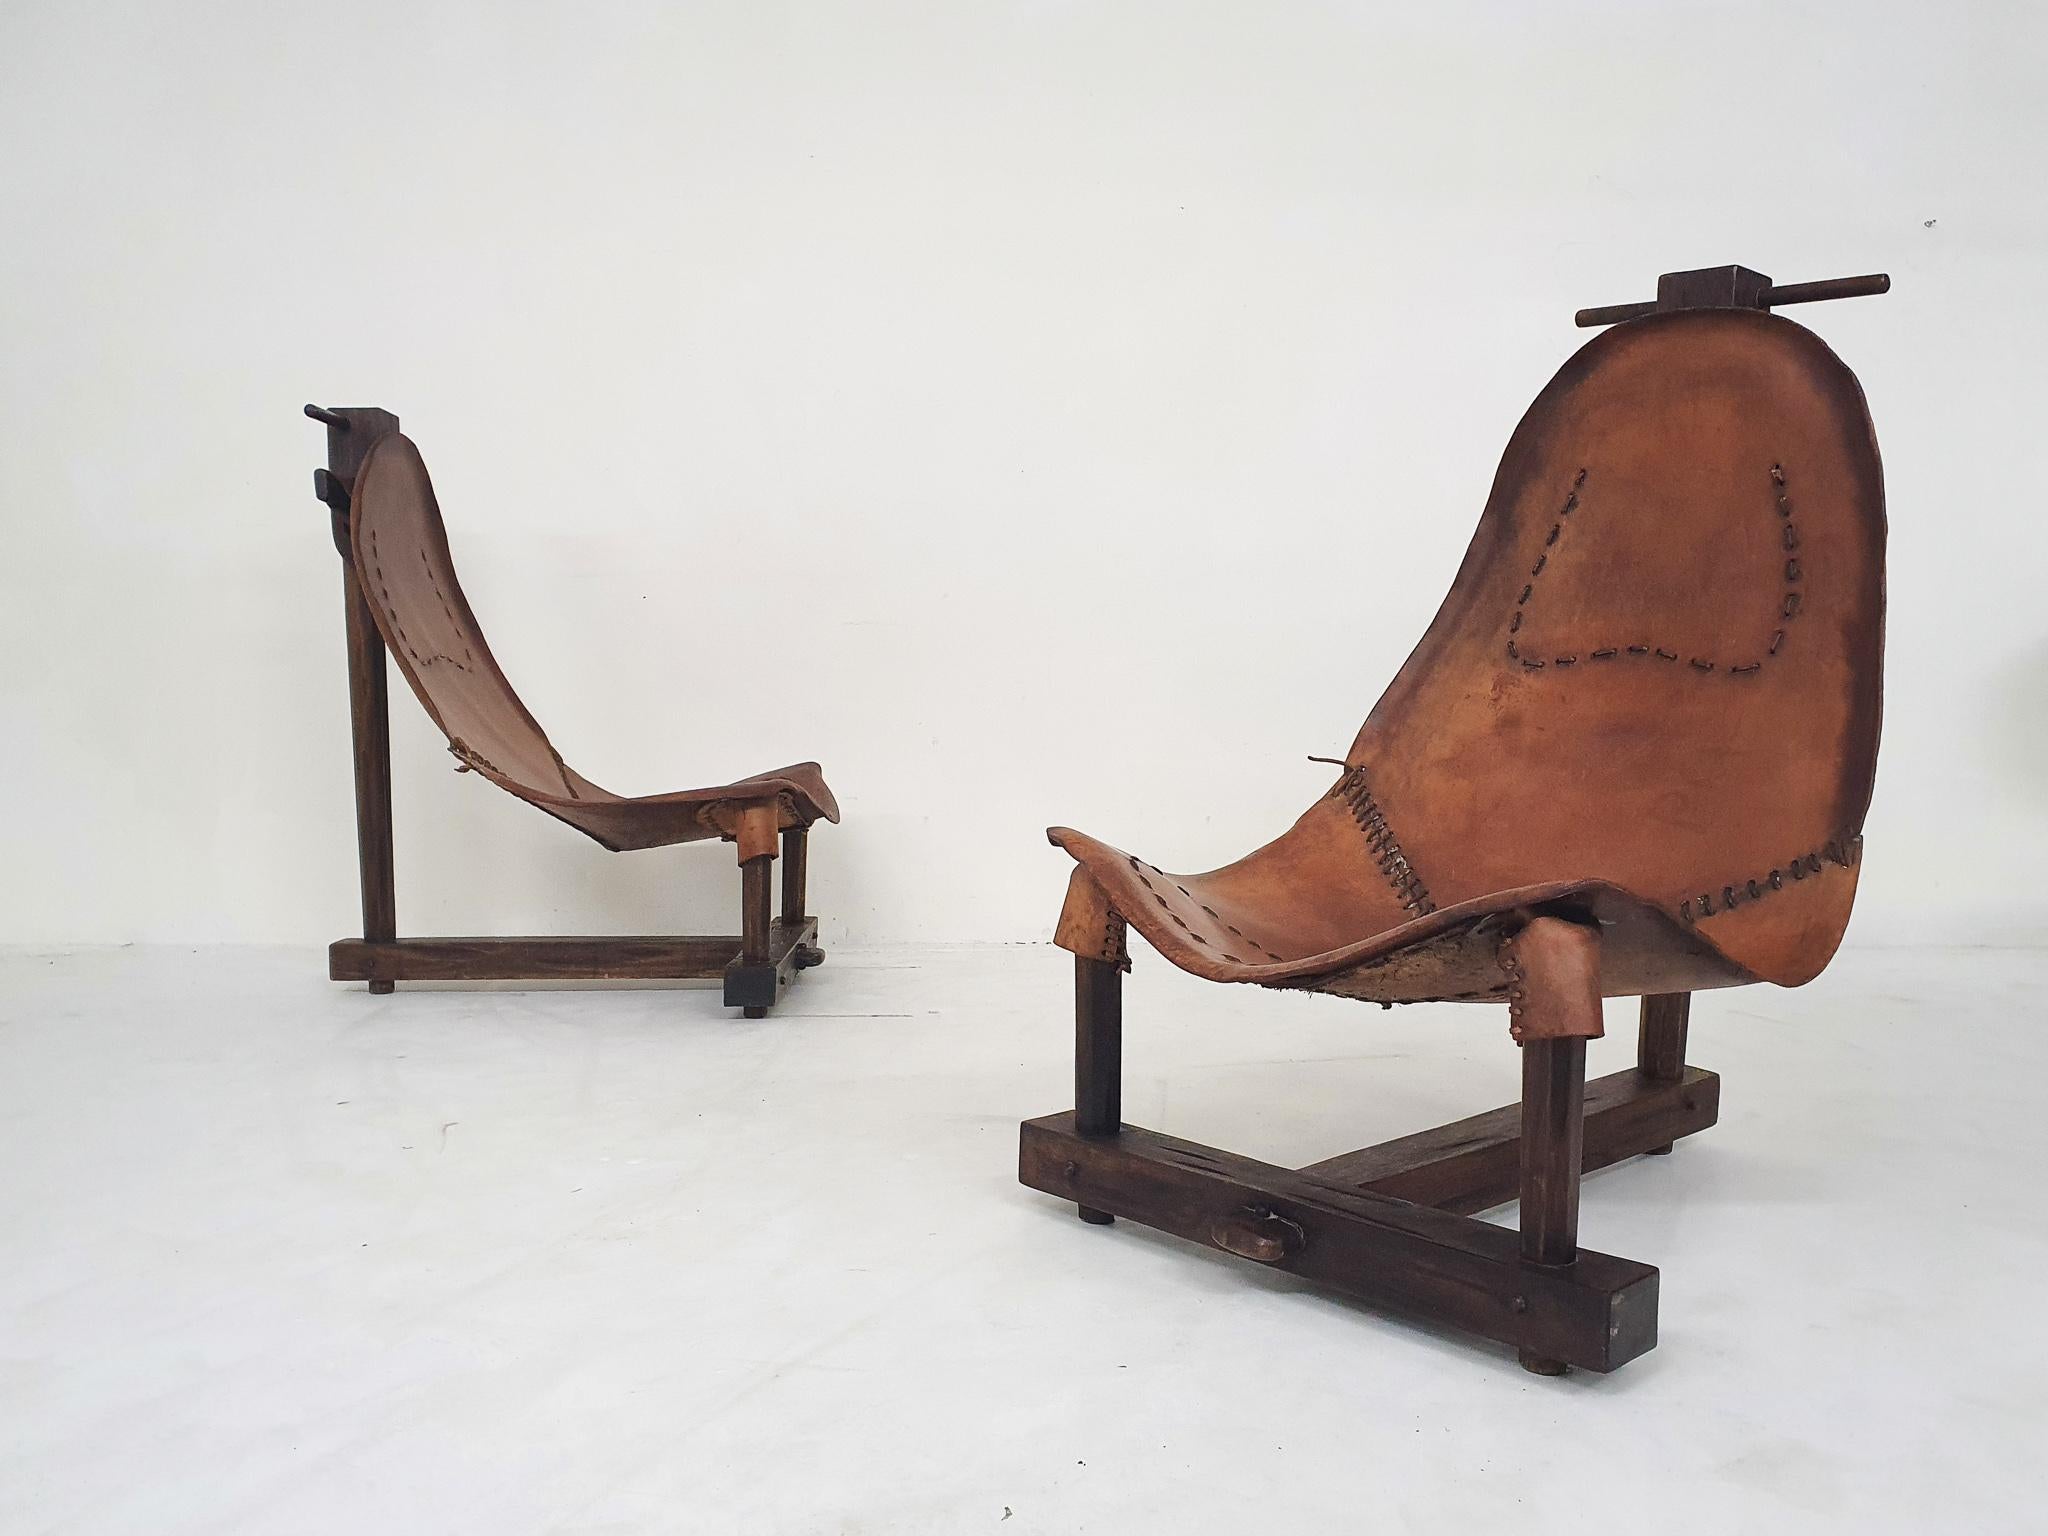 Solid wooden frames and saddle leather seating.
In good oriiginal condition. One chair has a small repair to the wood. The leather has a nice patina.